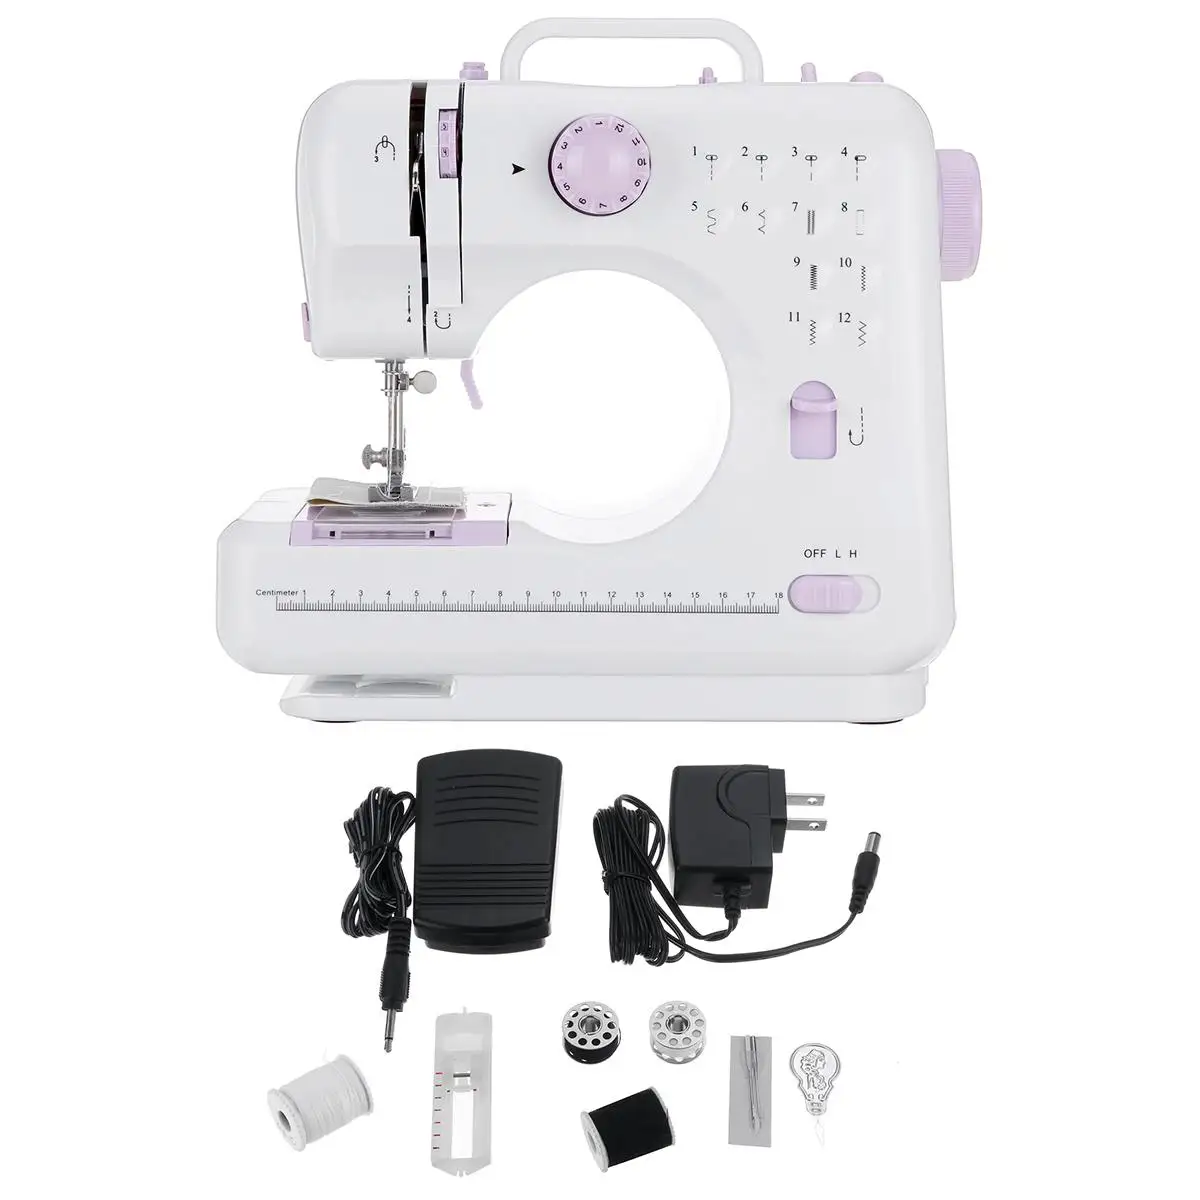 

Multifunction 12 Stitches LED Electric Sewing Machine with Foot Pedal Adjustable Speed Multifunction Quilting Household Sew Tool